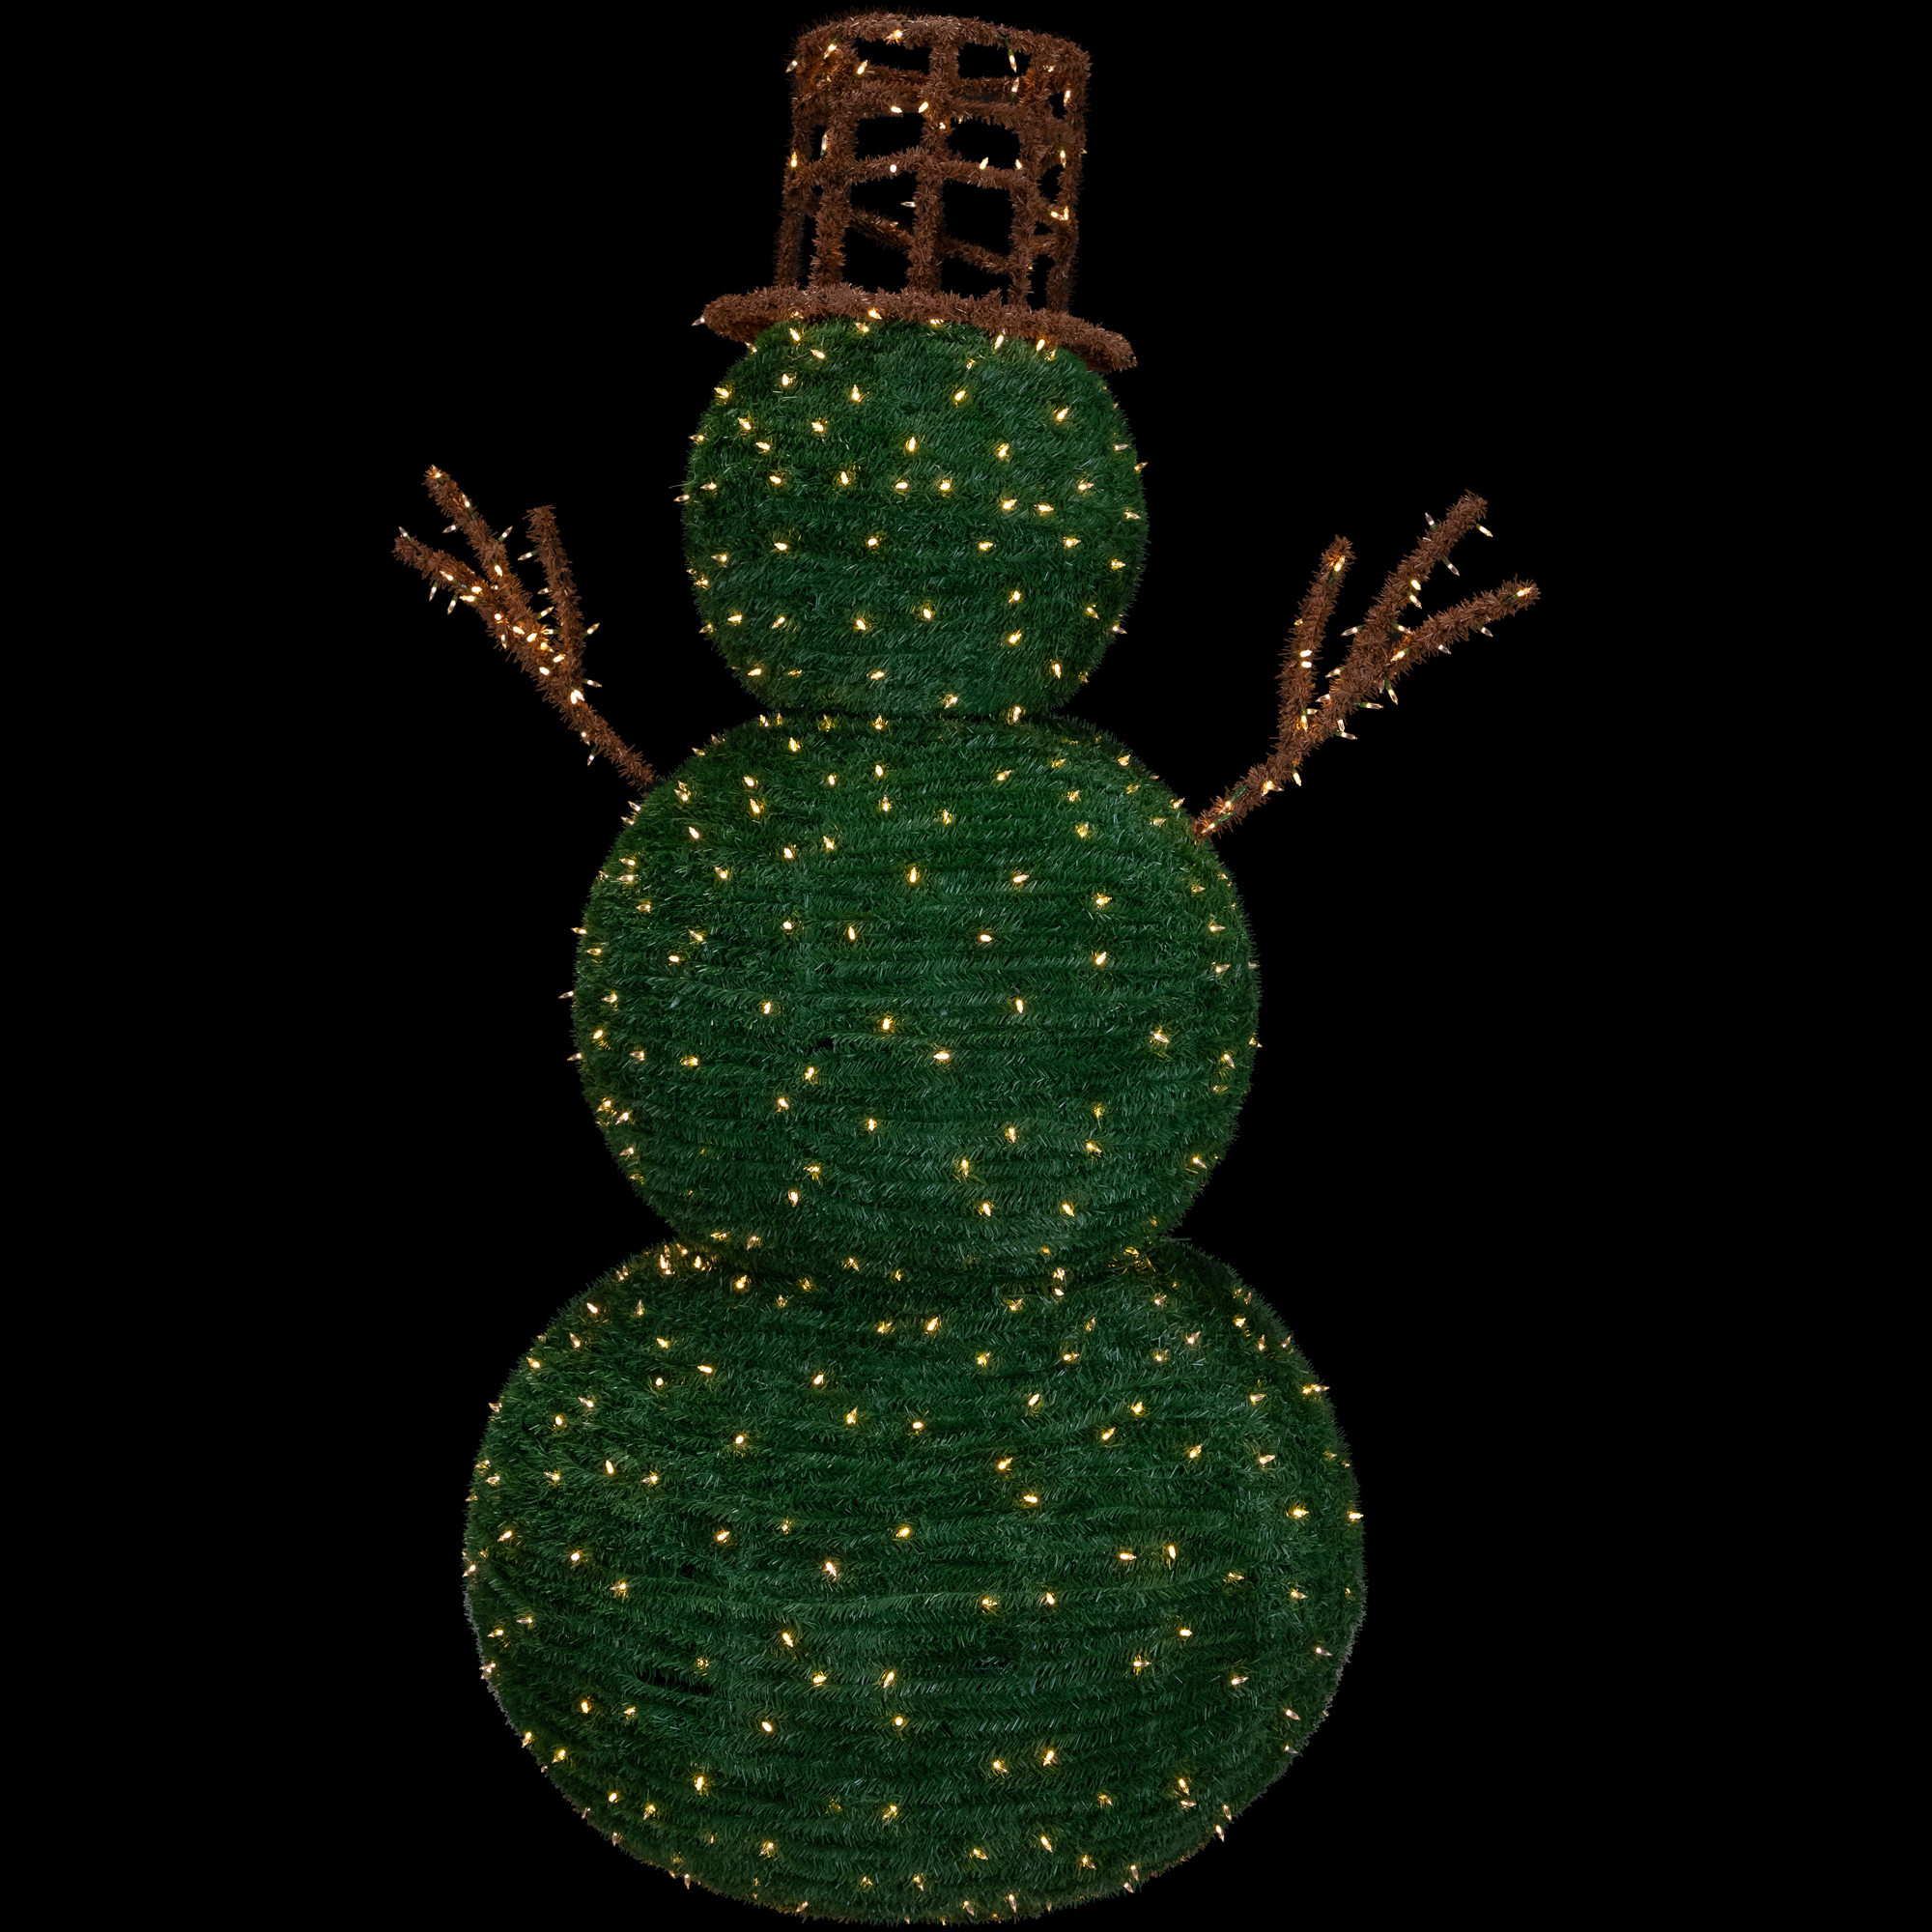 Northlight Lighted Commercial Topiary Snowman Outdoor Christmas Decoration - 6.5' - Warm White LED Lights